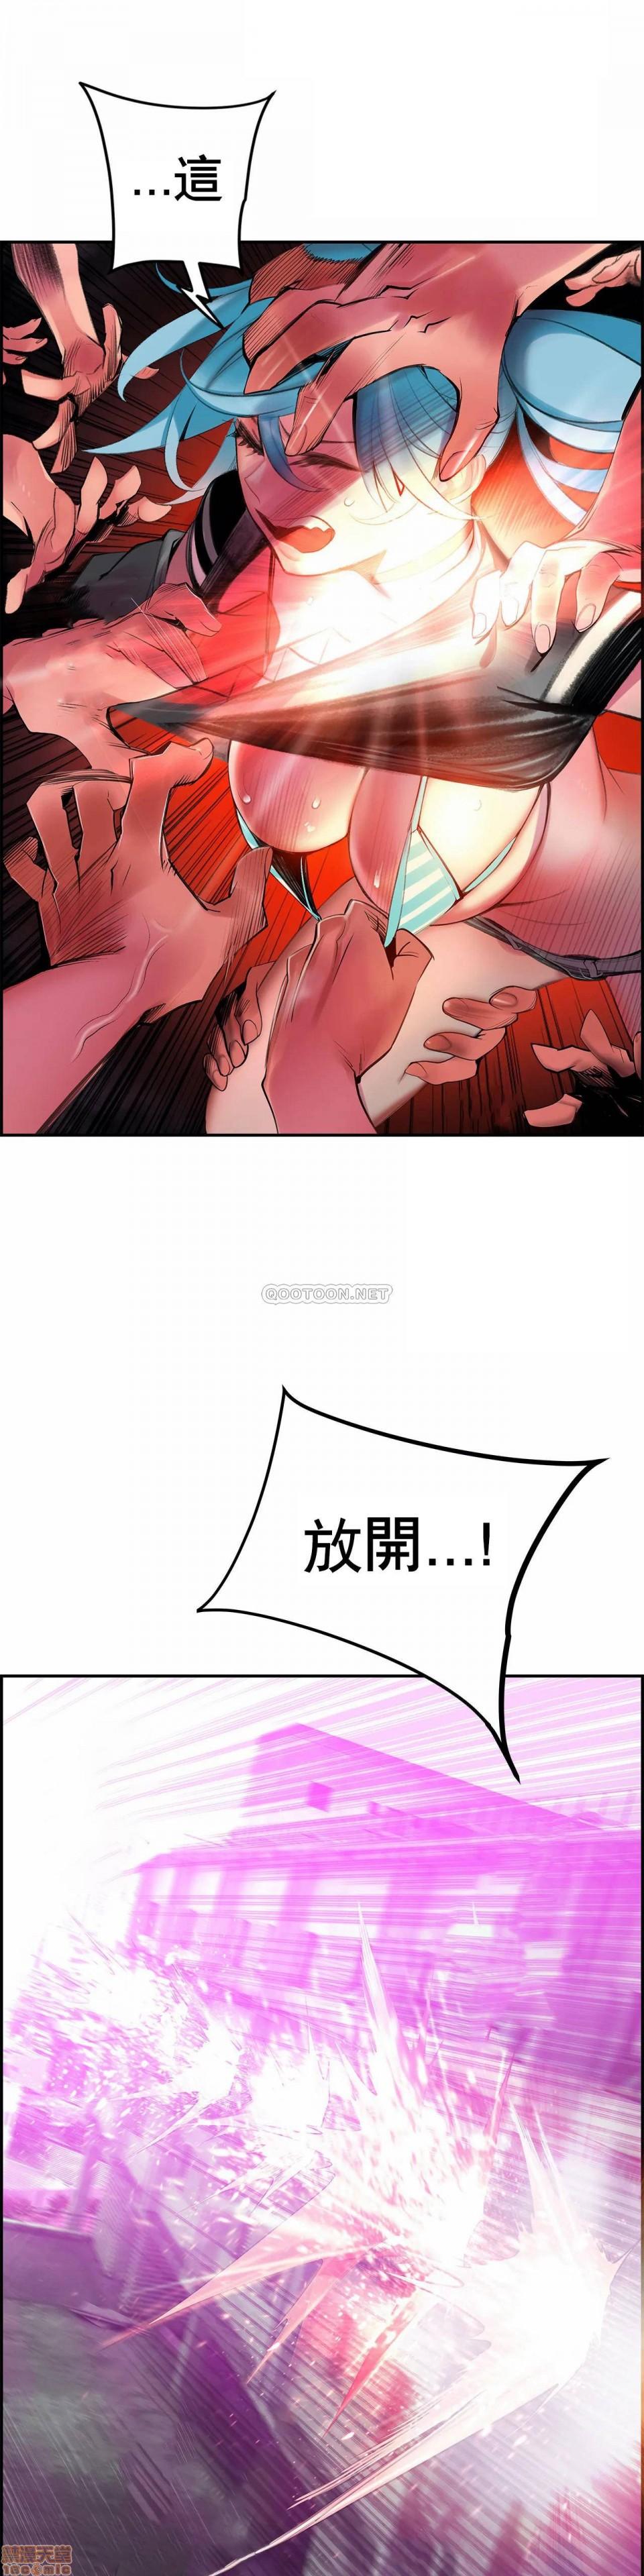 [Juder] Lilith`s Cord (第二季) Ch.77-93 end [Chinese] 170